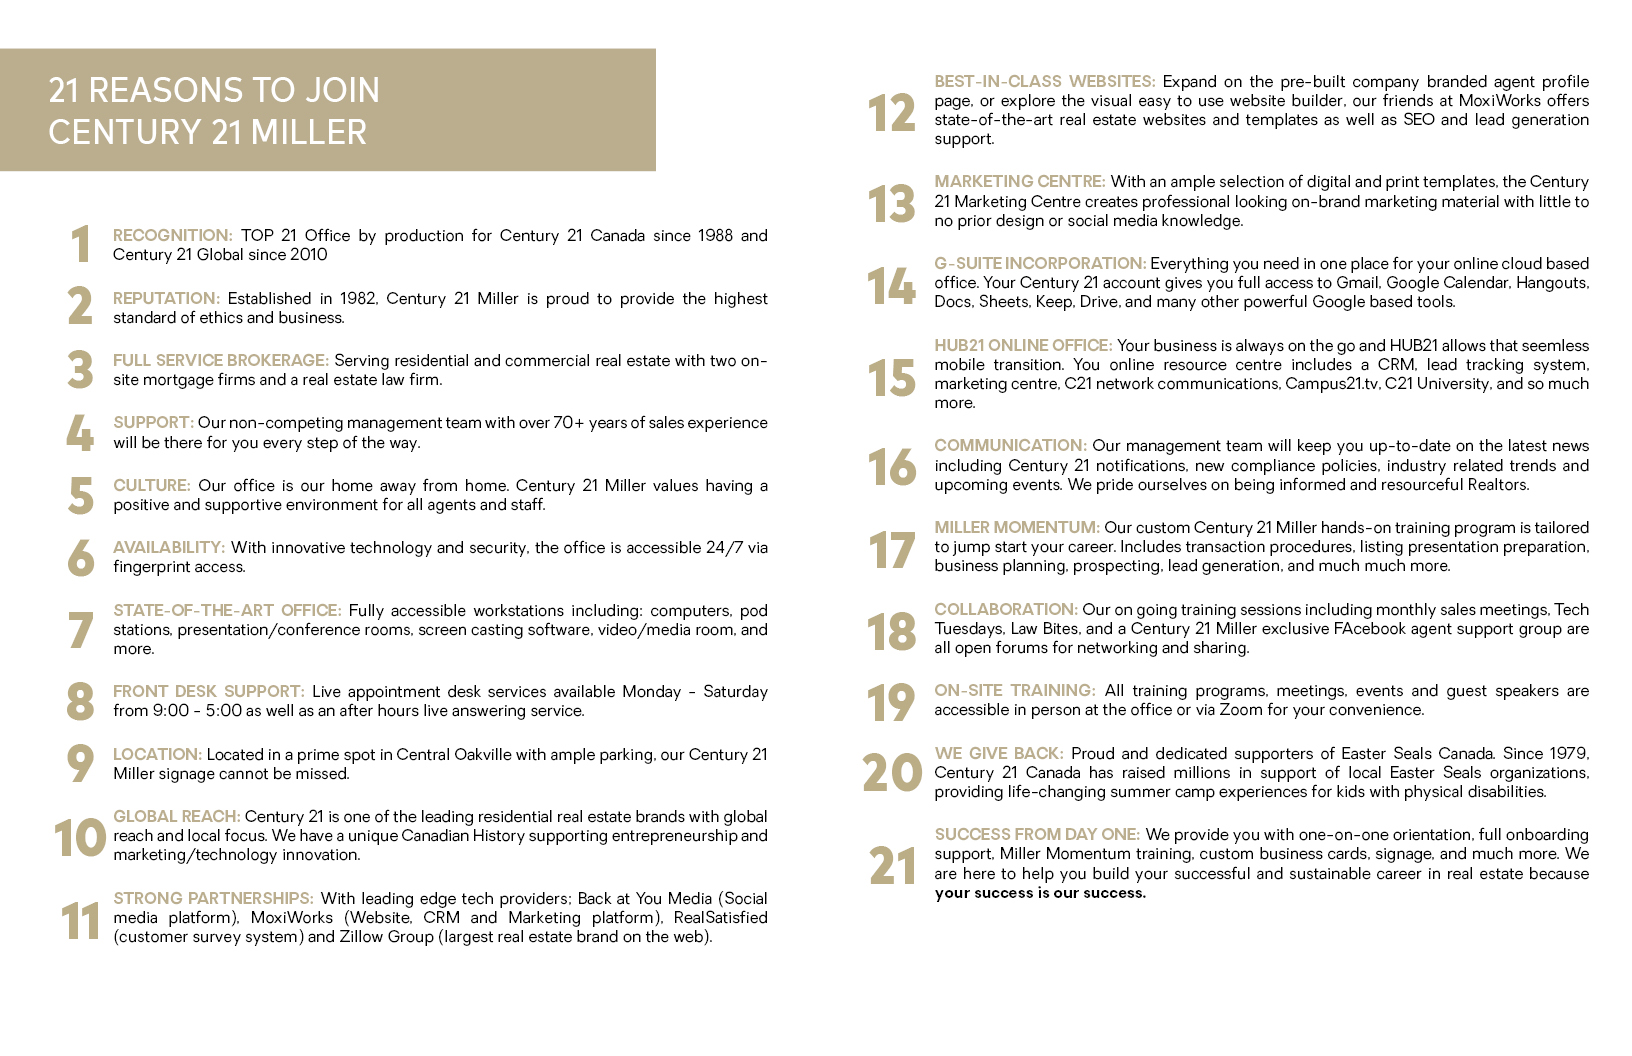 21 Reasons to Join C21Miller